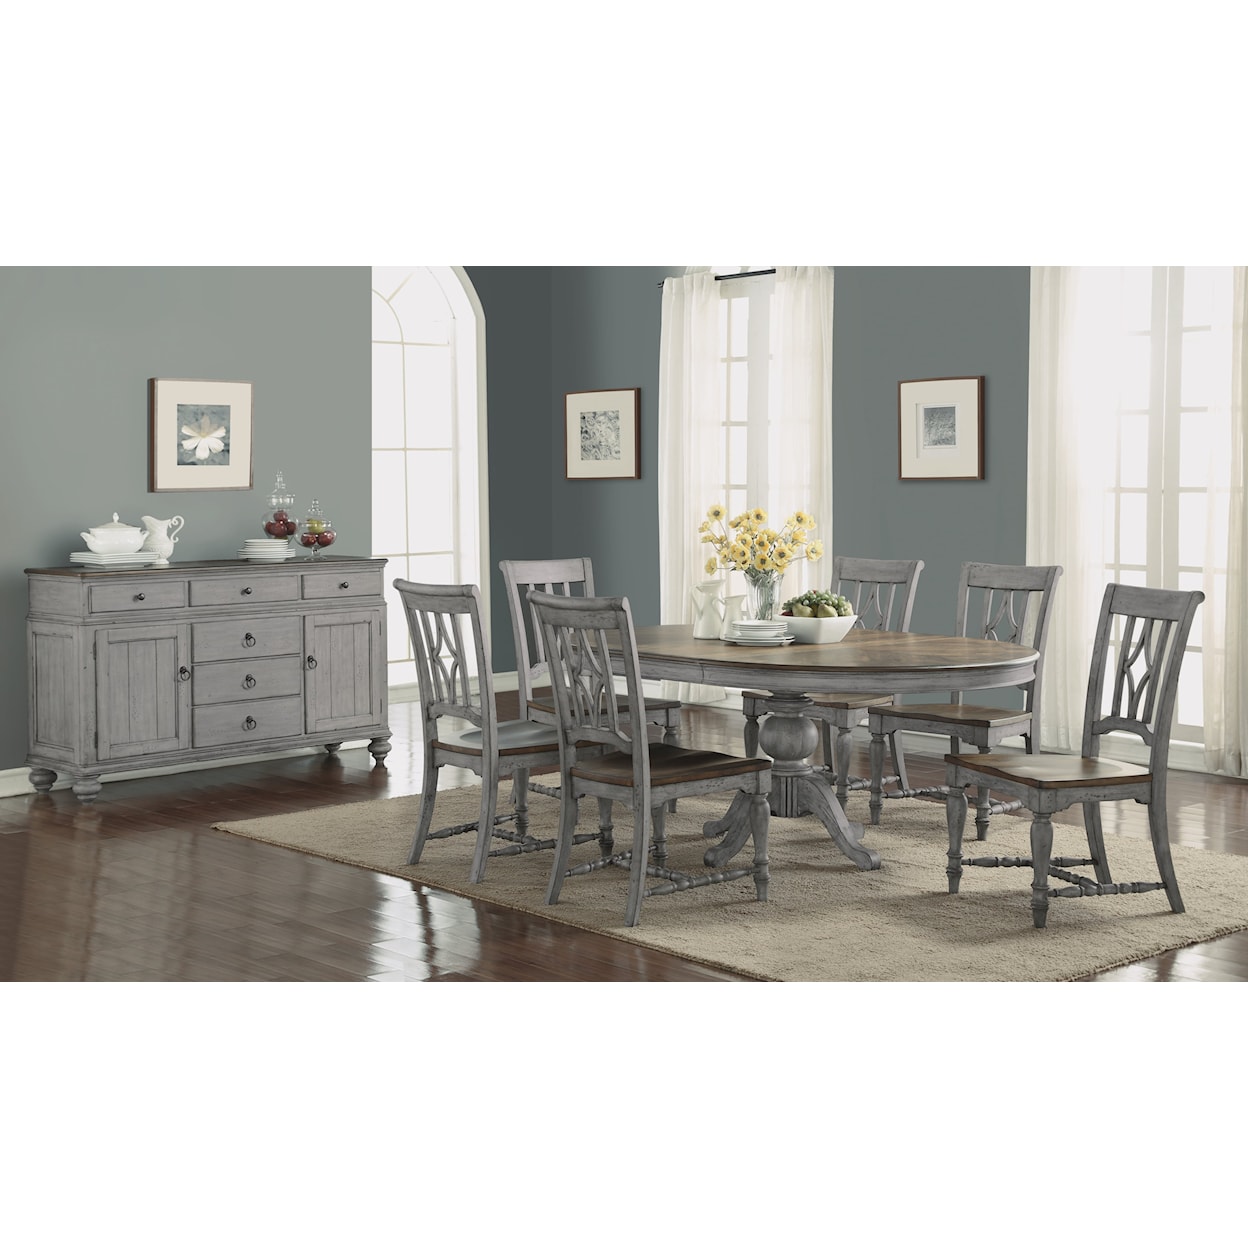 Flexsteel Wynwood Collection Plymouth Table and Chair Set